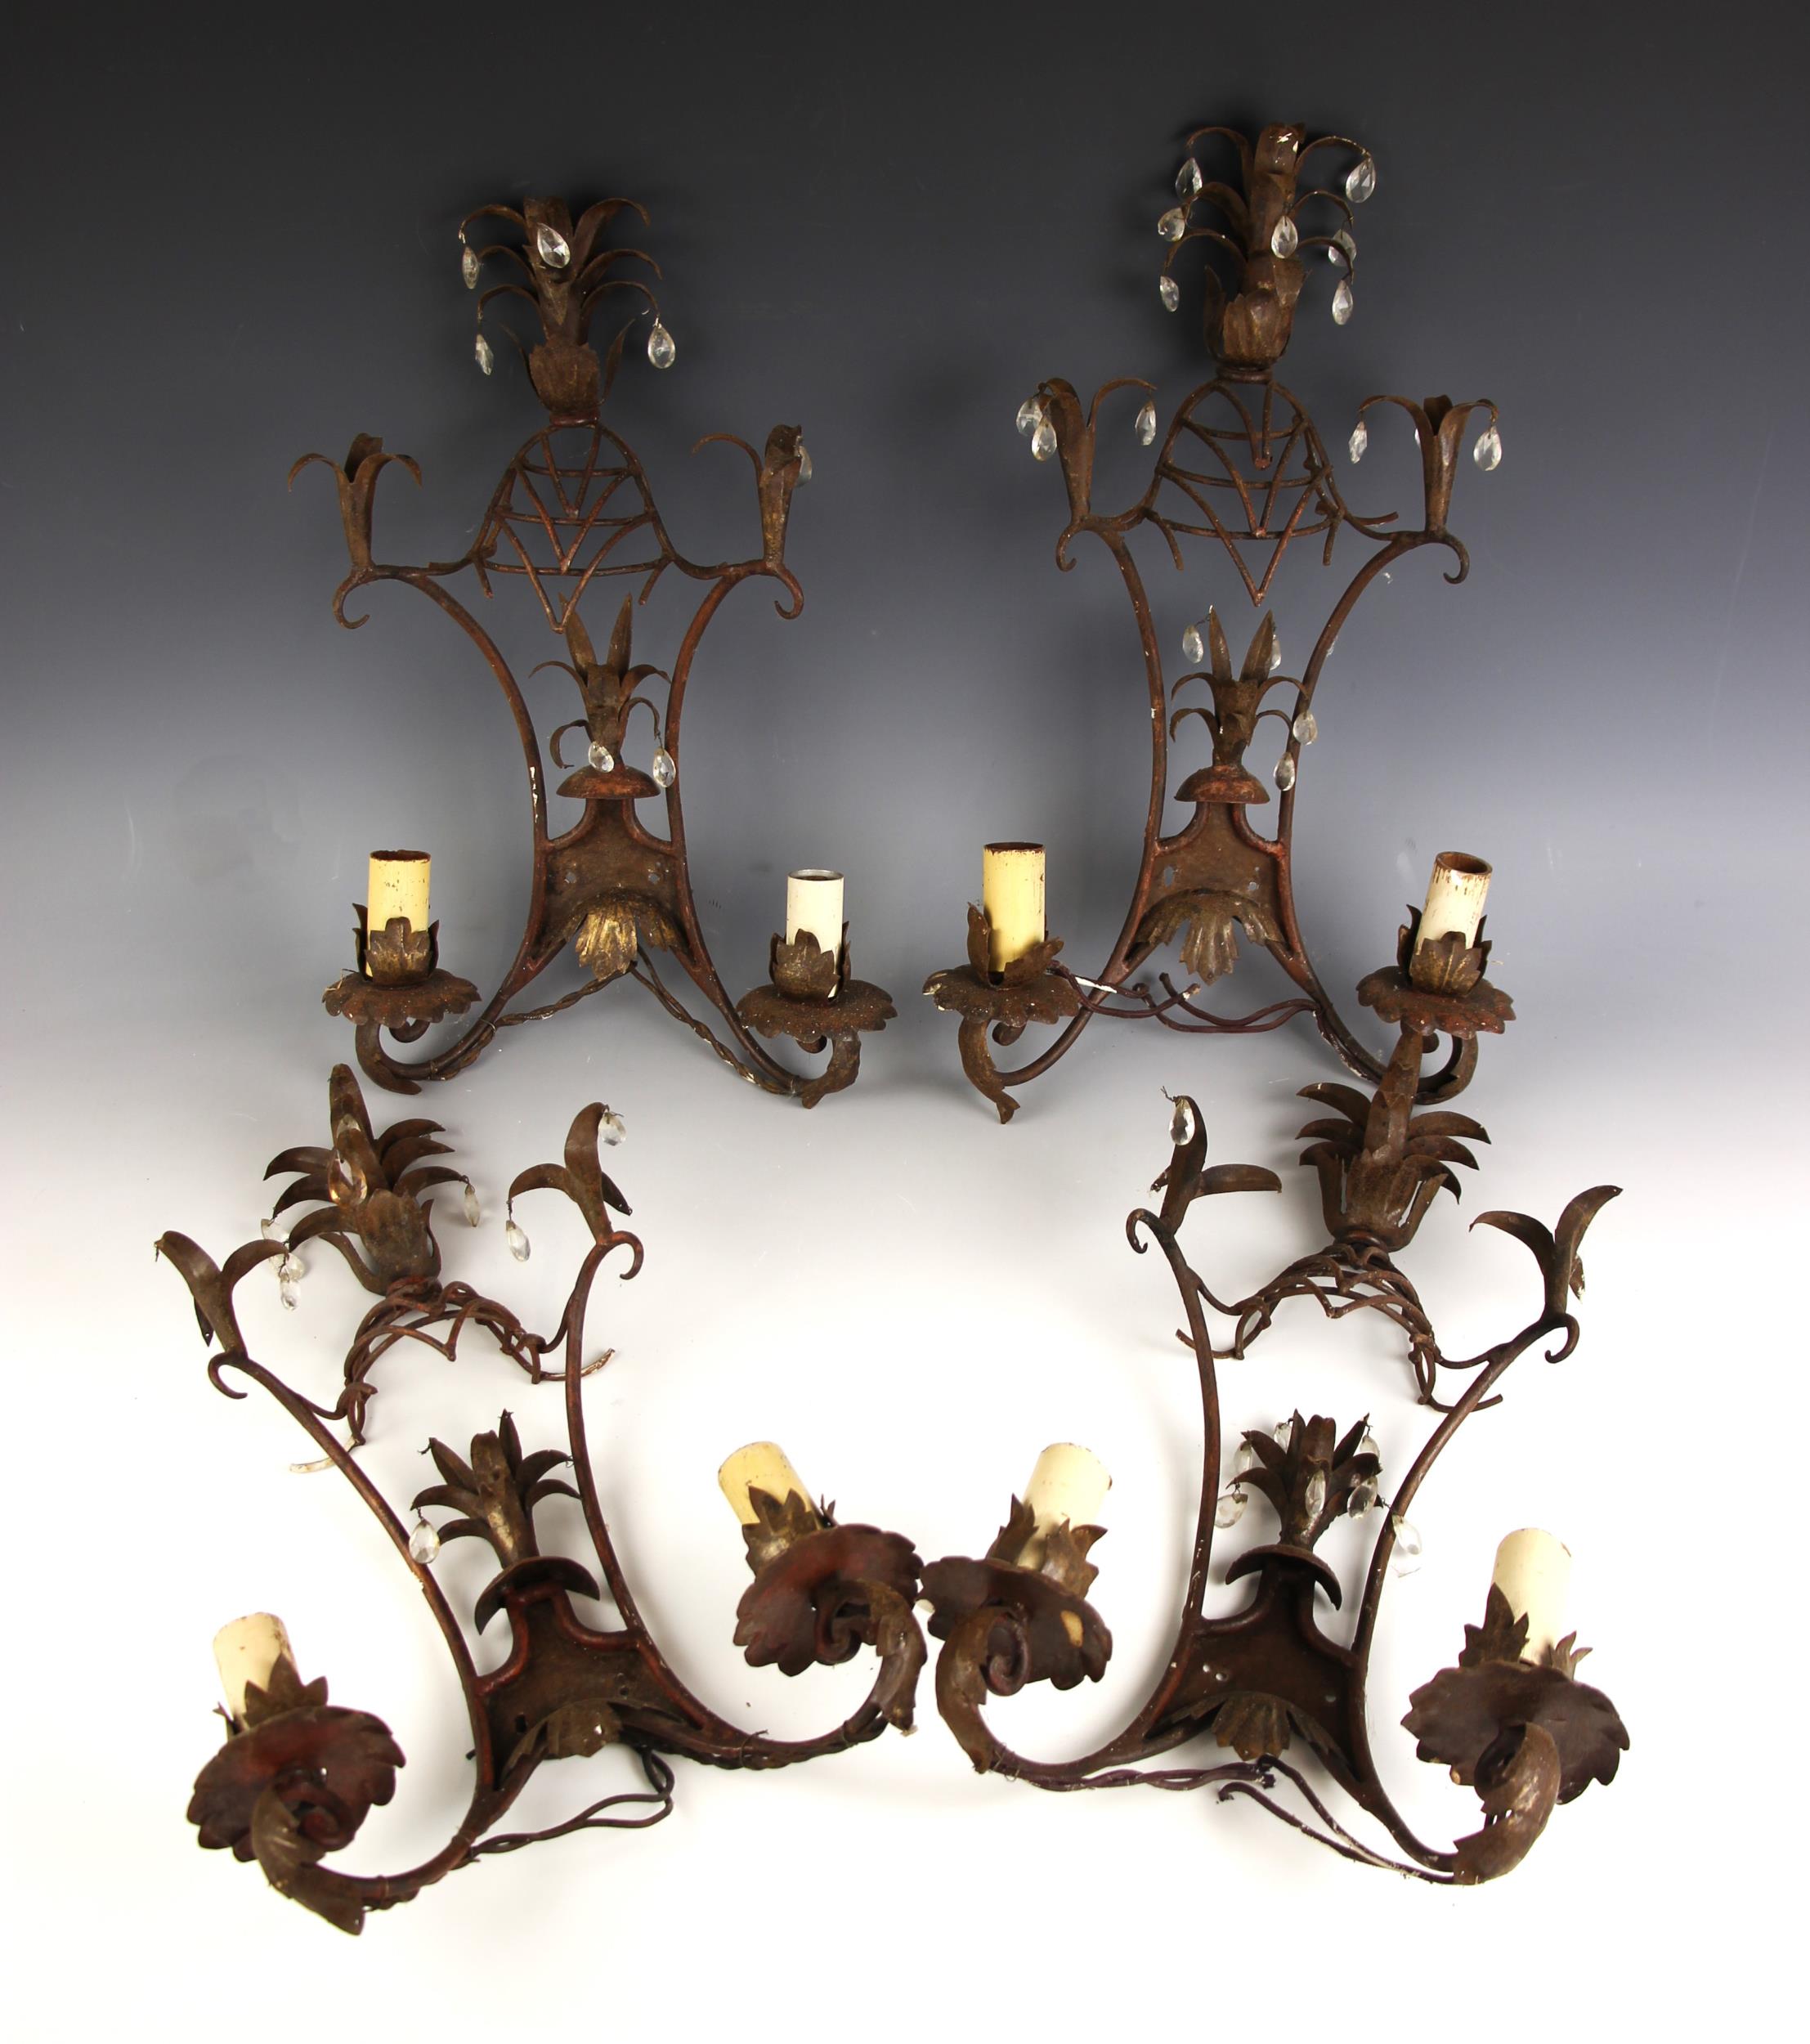 Four toleware and wirework style twin branch wall sconces, each with pineapple finial, and hanging